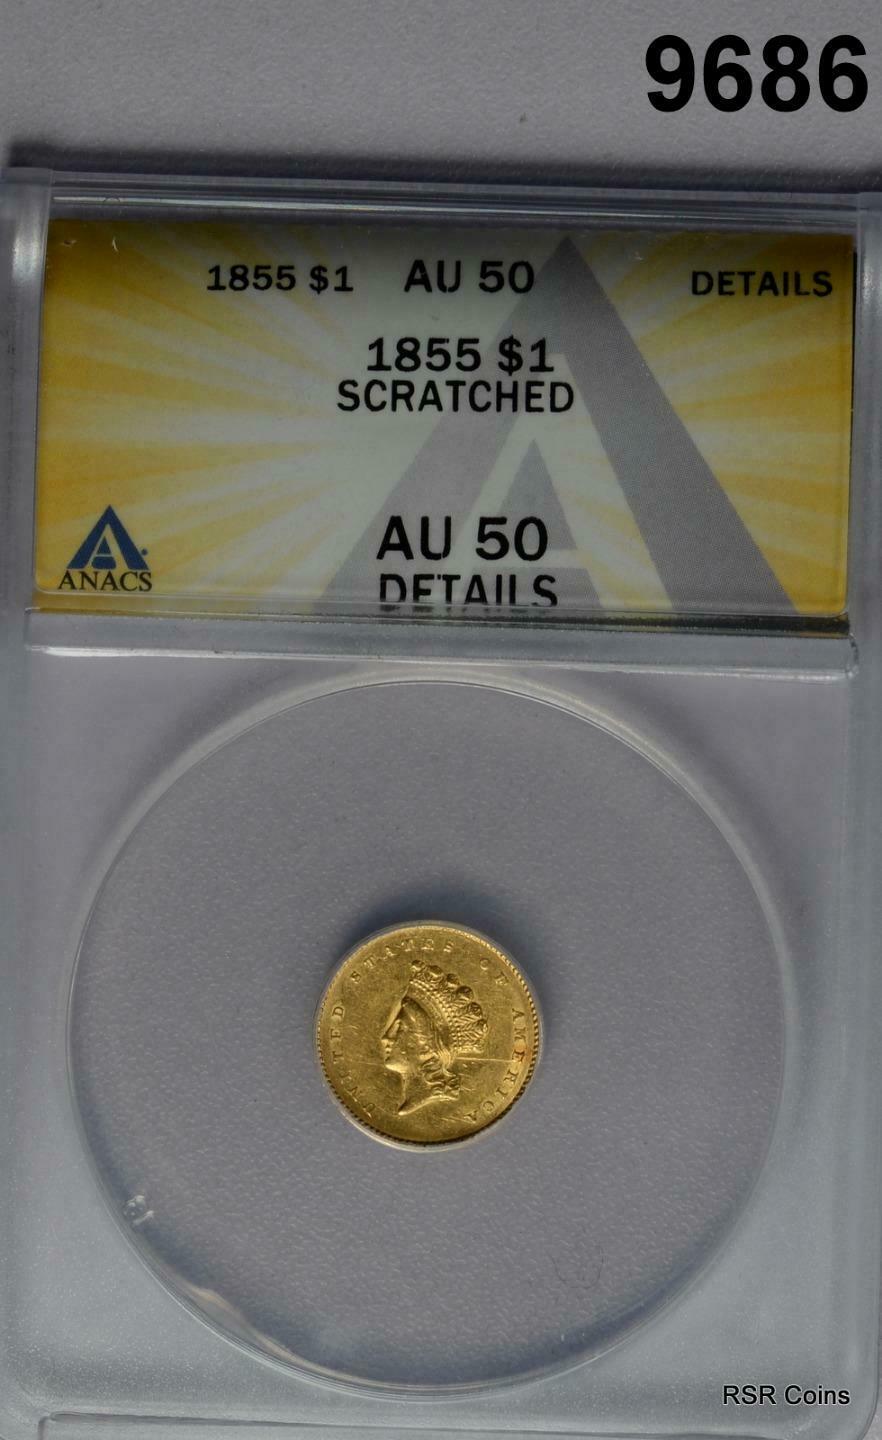 1855 LIBERTY GOLD DOLLAR ANACS CERTIFIED AU50 SCRATCHED #9686